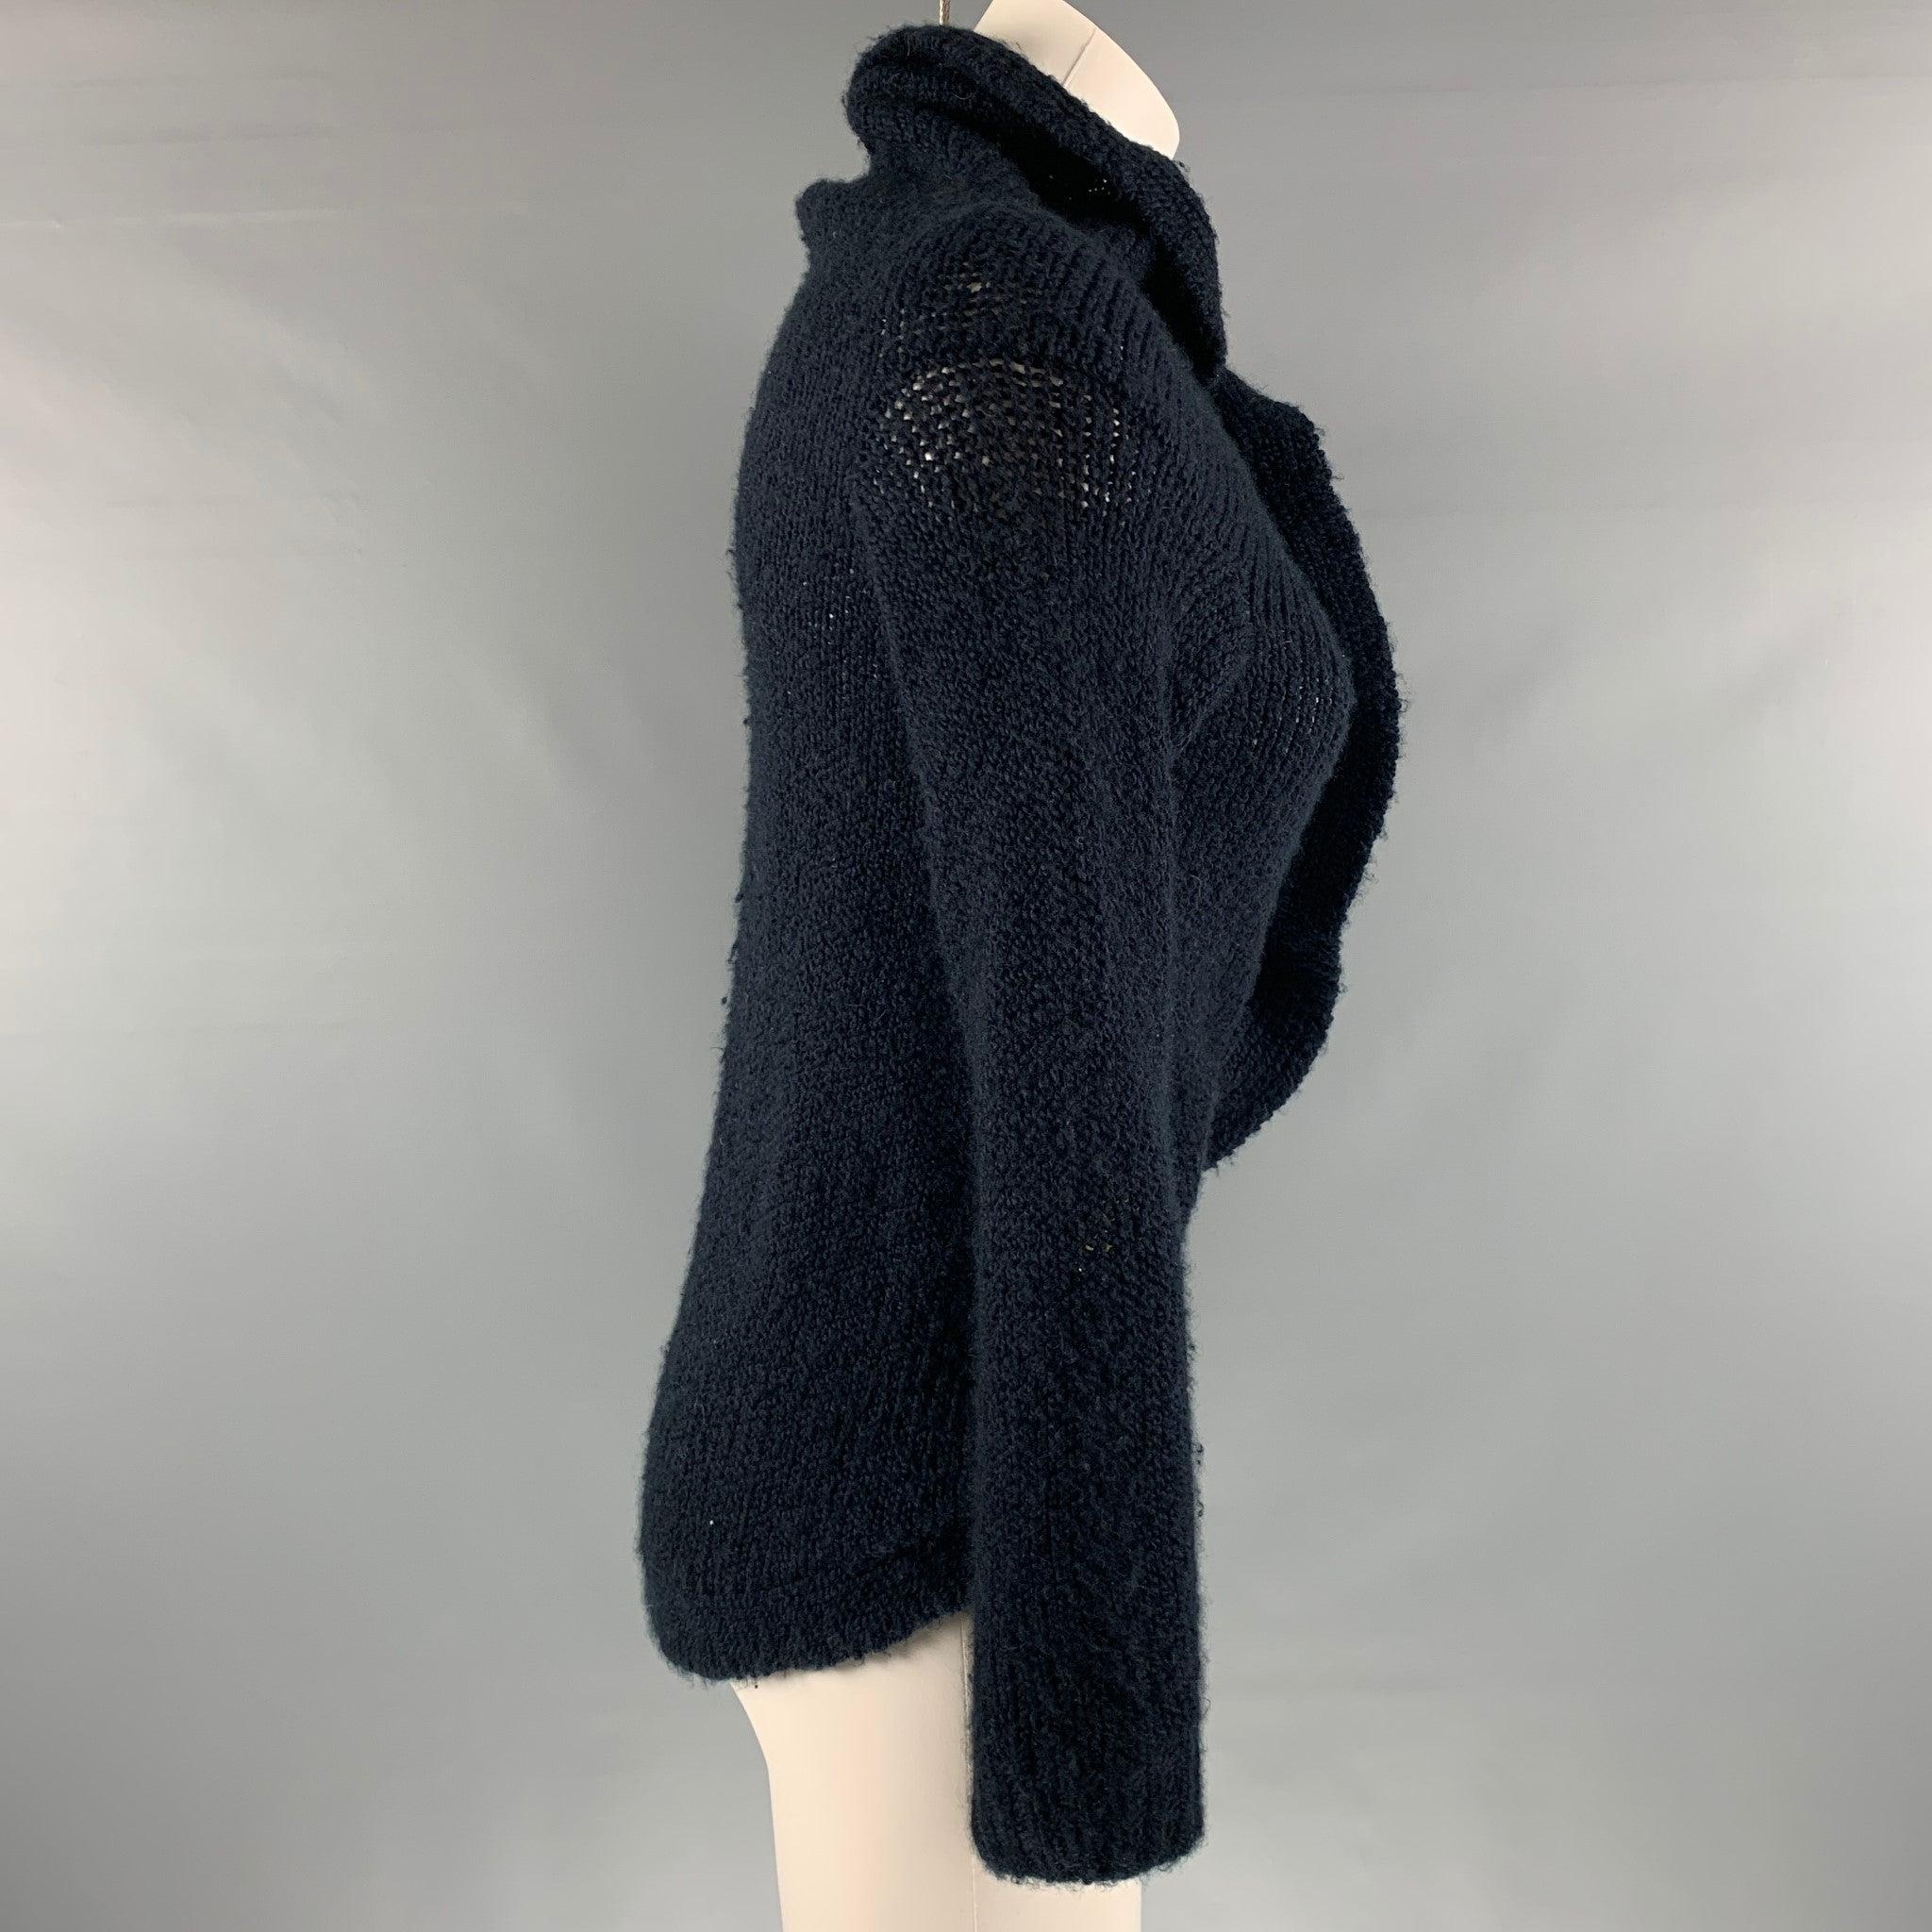 MARNI cardigan comes in a navy knitted material featuring an asymmetrical style, and button up closure. Made in Italy.Very Good Pre-Owned Condition. Moderate signs of wear and piling. 

Marked:   38 

Measurements: 
 
Shoulder: 17 inches  Bust: 42